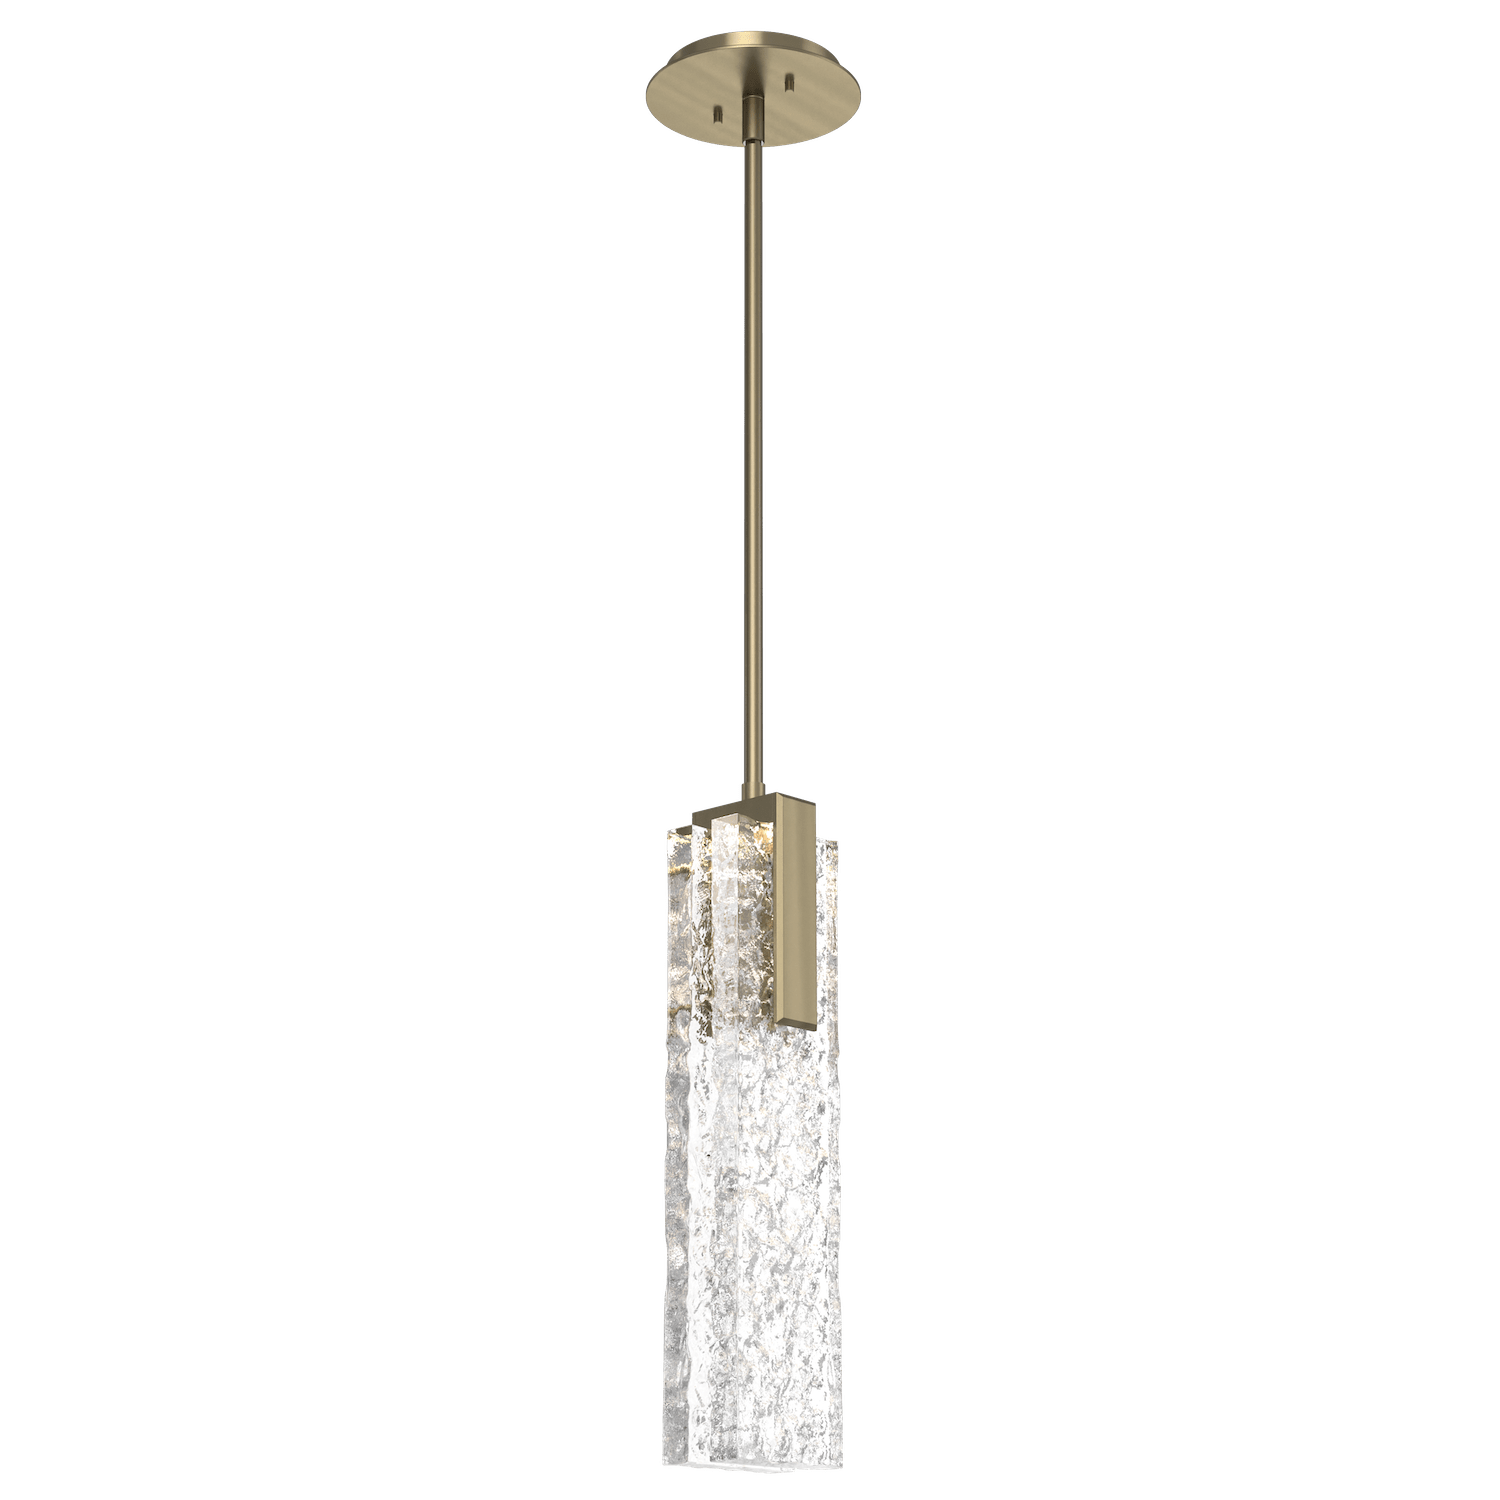 LAB0061-17-HB-GC-Hammerton-Studio-Glacier-pendant-light-with-heritage-brass-finish-and-clear-blown-glass-with-geo-clear-cast-glass-diffusers-and-LED-lamping